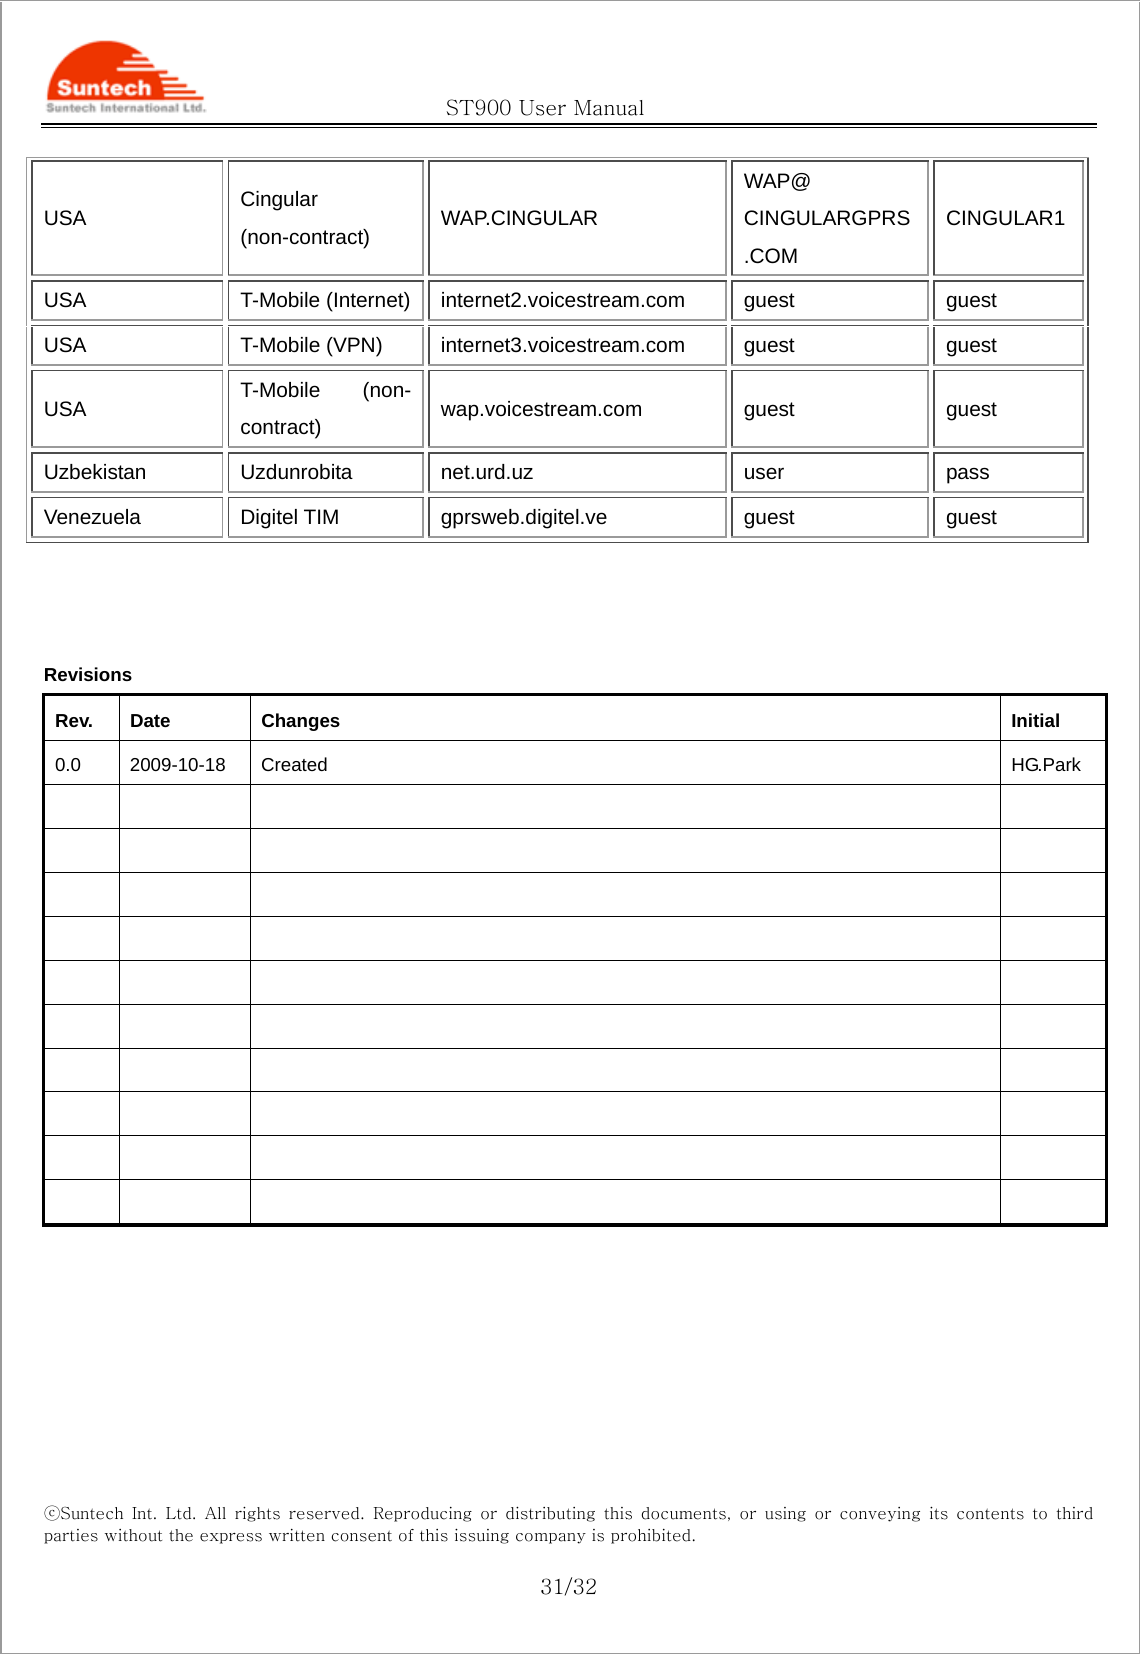                                               ST900 User Manual ⓒSuntech  Int.  Ltd.  All  rights  reserved.  Reproducing  or  distributing this documents, or using or conveying its contents to third parties without the express written consent of this issuing company is prohibited.  31/32 USA Cingular (non-contract) WAP.CINGULAR WAP@ CINGULARGPRS .COM CINGULAR1USA T-Mobile (Internet) internet2.voicestream.com guest guest USA T-Mobile (VPN) internet3.voicestream.com guest guest USA T-Mobile (non-contract) wap.voicestream.com guest guest Uzbekistan Uzdunrobita net.urd.uz user pass Venezuela Digitel TIM gprsweb.digitel.ve guest guest    Revisions Rev. Date  Changes  Initial 0.0 2009-10-18 Created   HG.Park                                                          